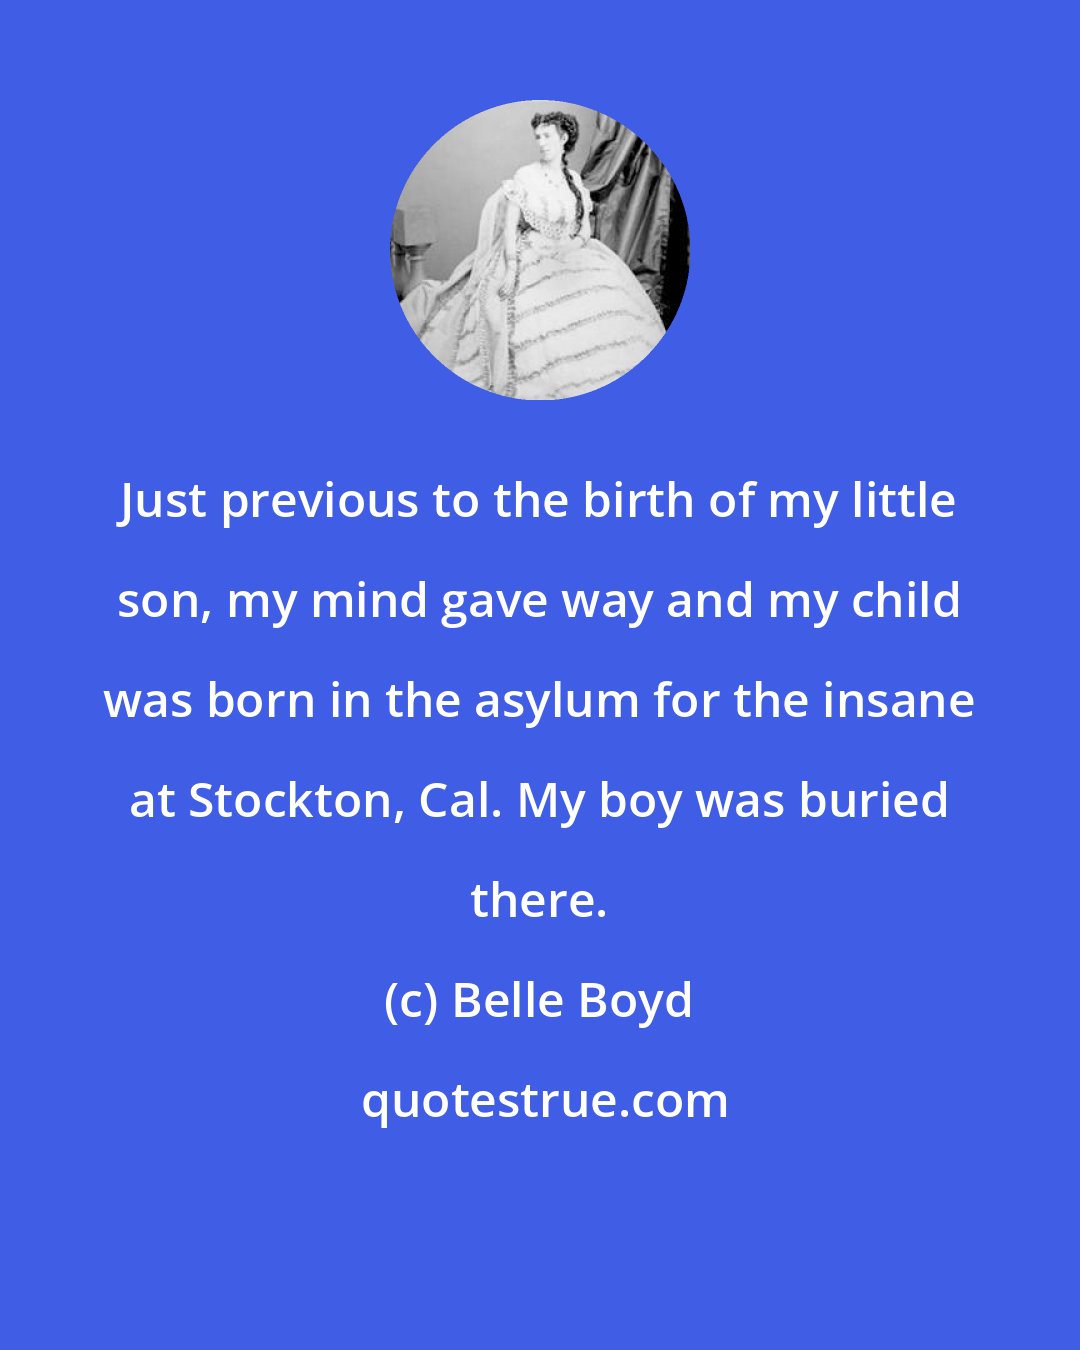 Belle Boyd: Just previous to the birth of my little son, my mind gave way and my child was born in the asylum for the insane at Stockton, Cal. My boy was buried there.